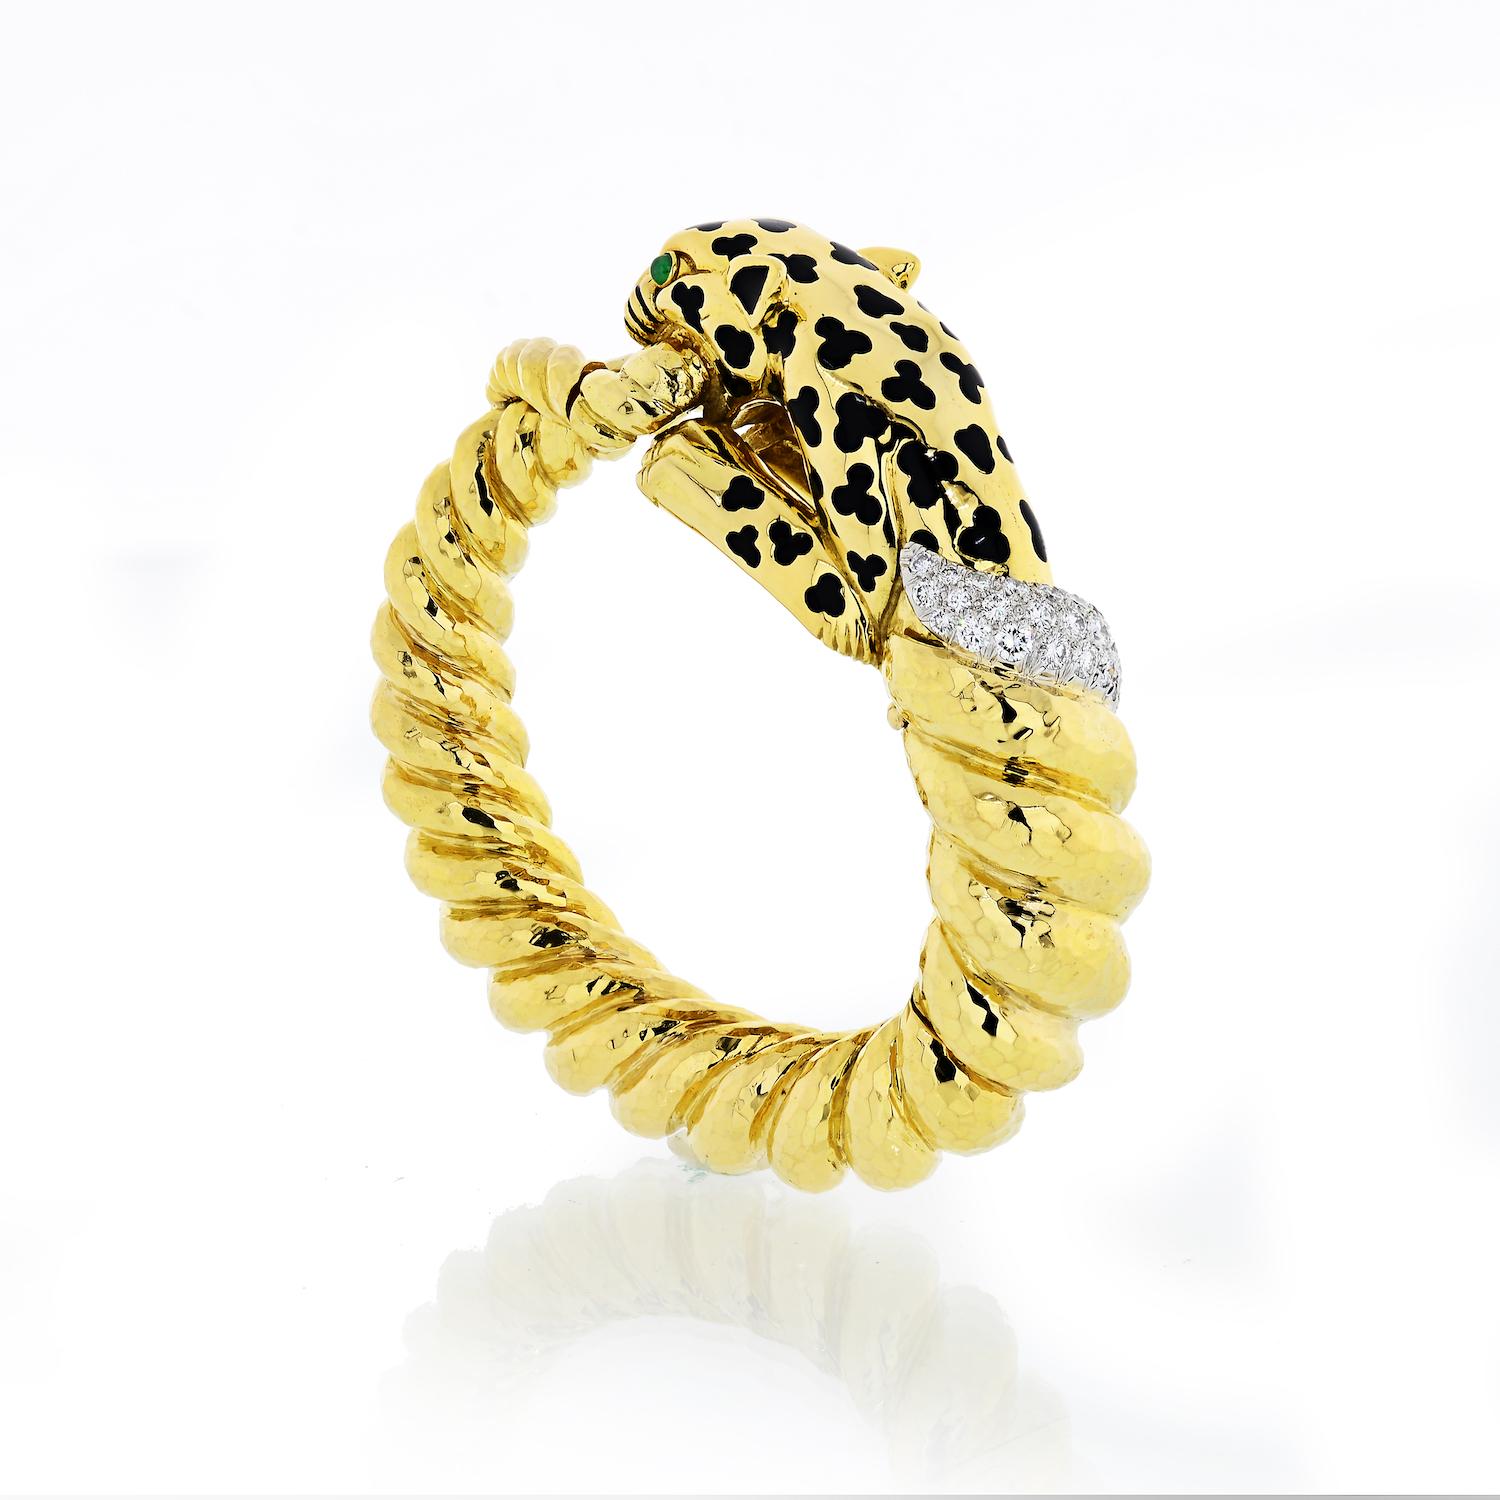 David Webb Yellow Gold Leopard designed as a twisted bangle bracelet, decorated with black enamel spots, cabochon emerald eyes, and pavé-set diamonds.

The Leopard bracelet is crafted in 18k yellow gold and platinum. 

Total diamond weight: 2.18